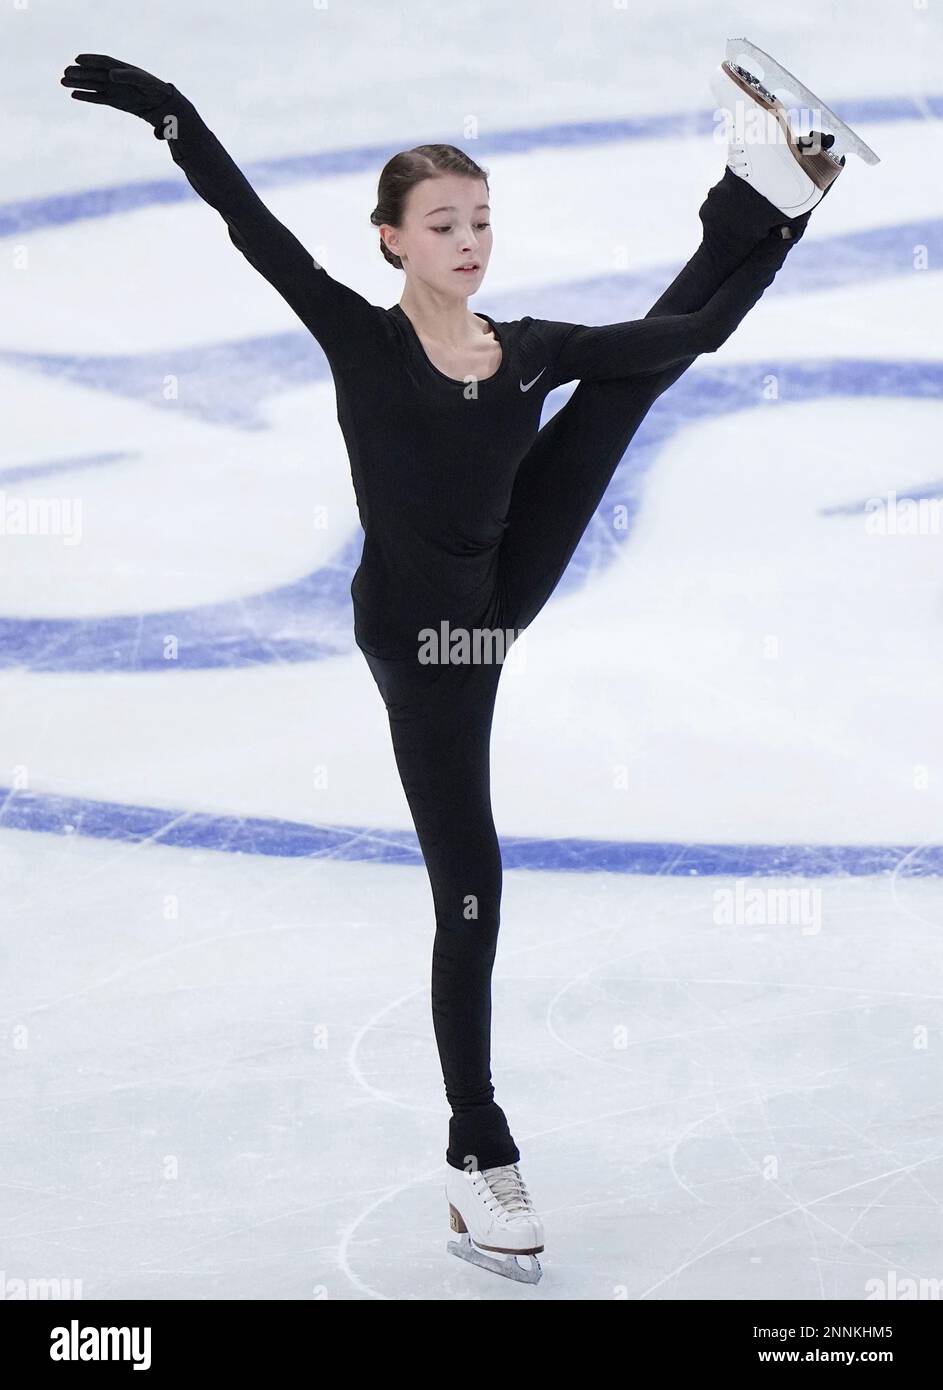 Anna Shcherbakova, a Russian figure skater, attends an official practice of the World Figure Skating Championships